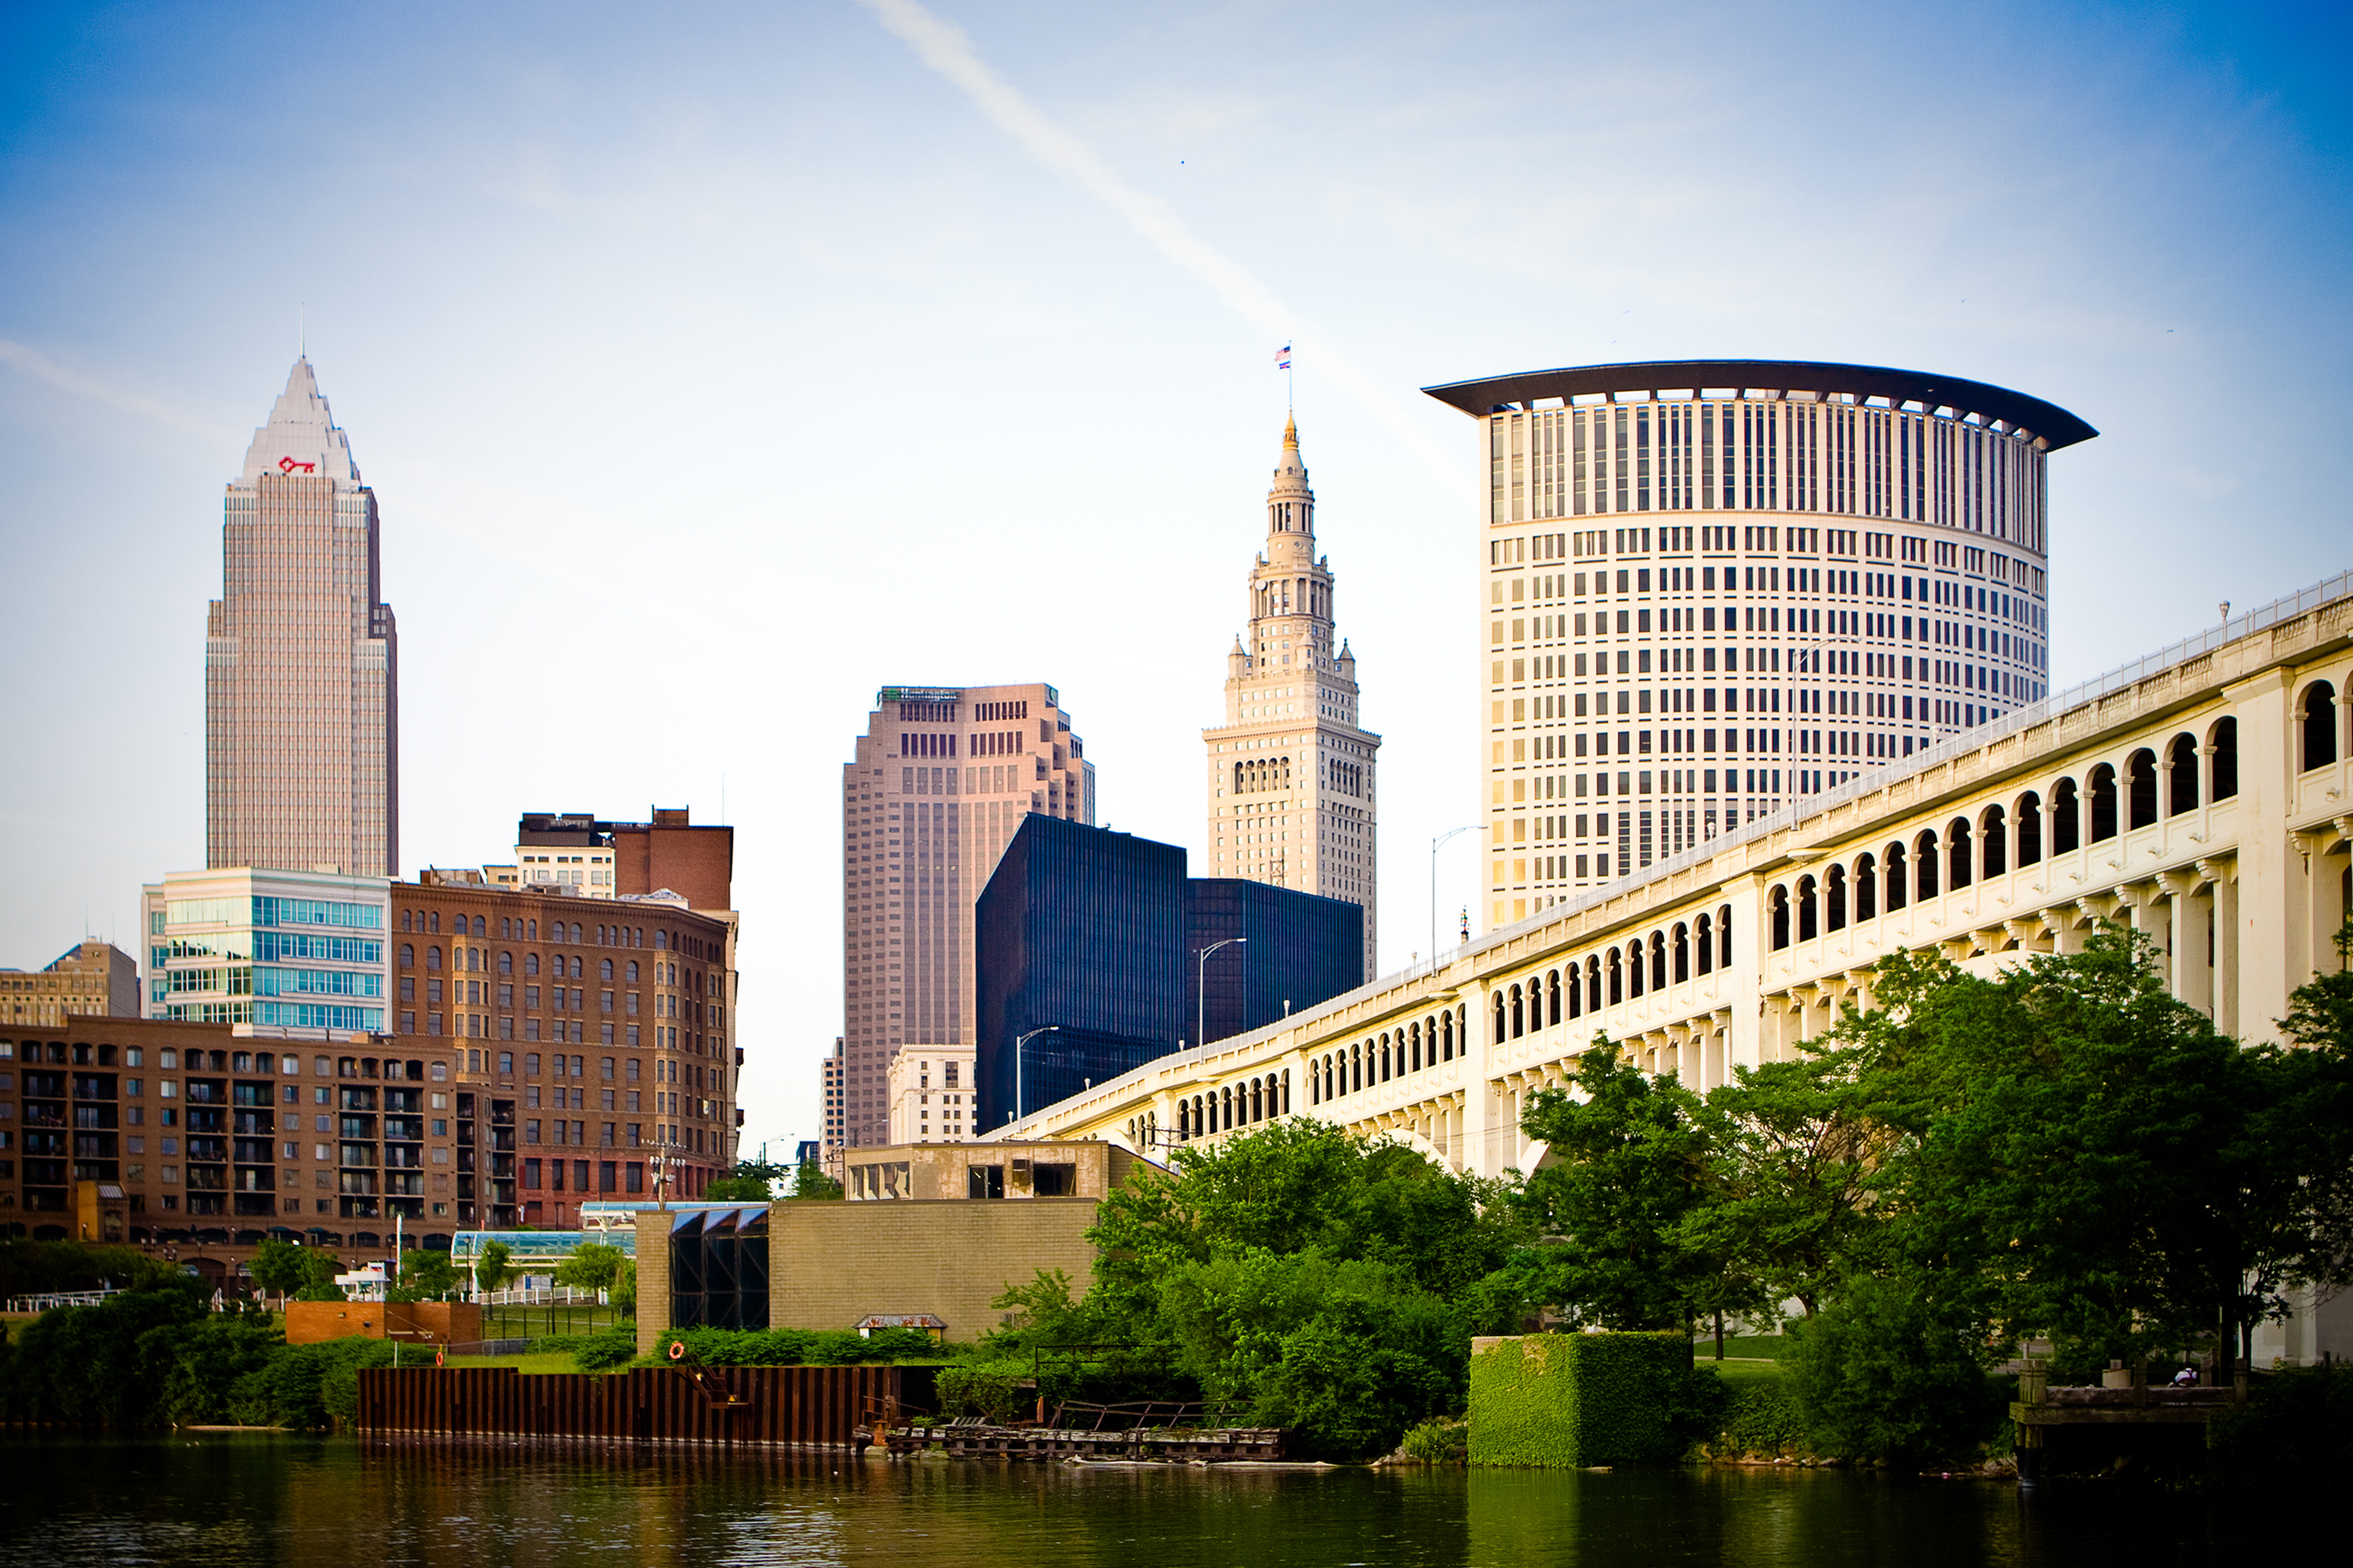  A photo of the Cleveland Skyline with the Veterans Memorial Bridge and Cuyahoga River. From left to right the 4 tallest buildings are The Key Tower, The BP-Huntington Building, The Terminal Tower and The Justice Center. 